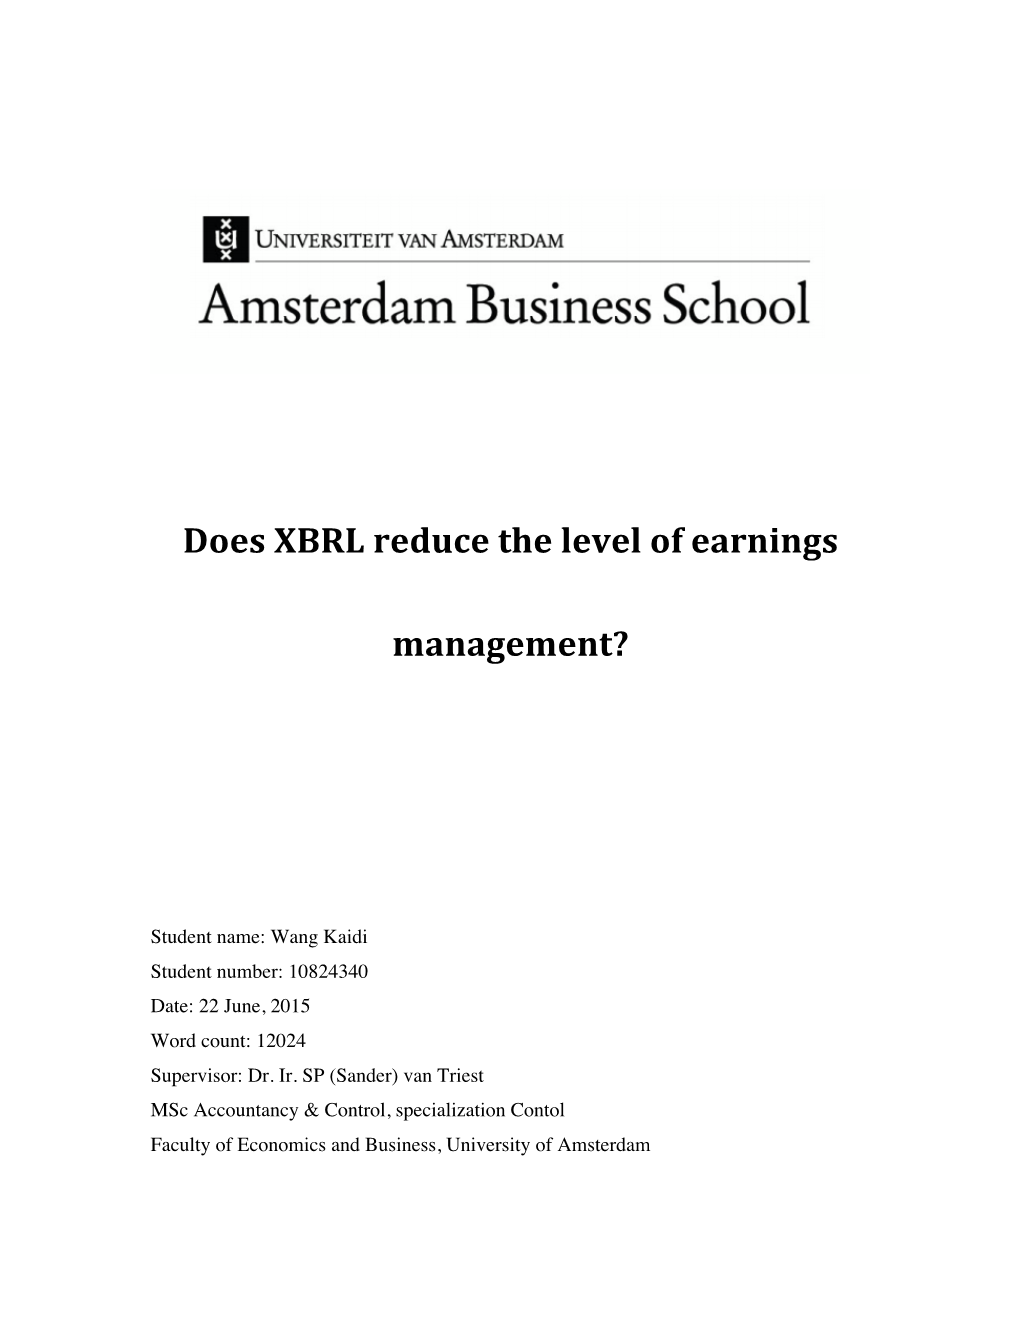 Does XBRL Reduce the Level of Earnings Management?